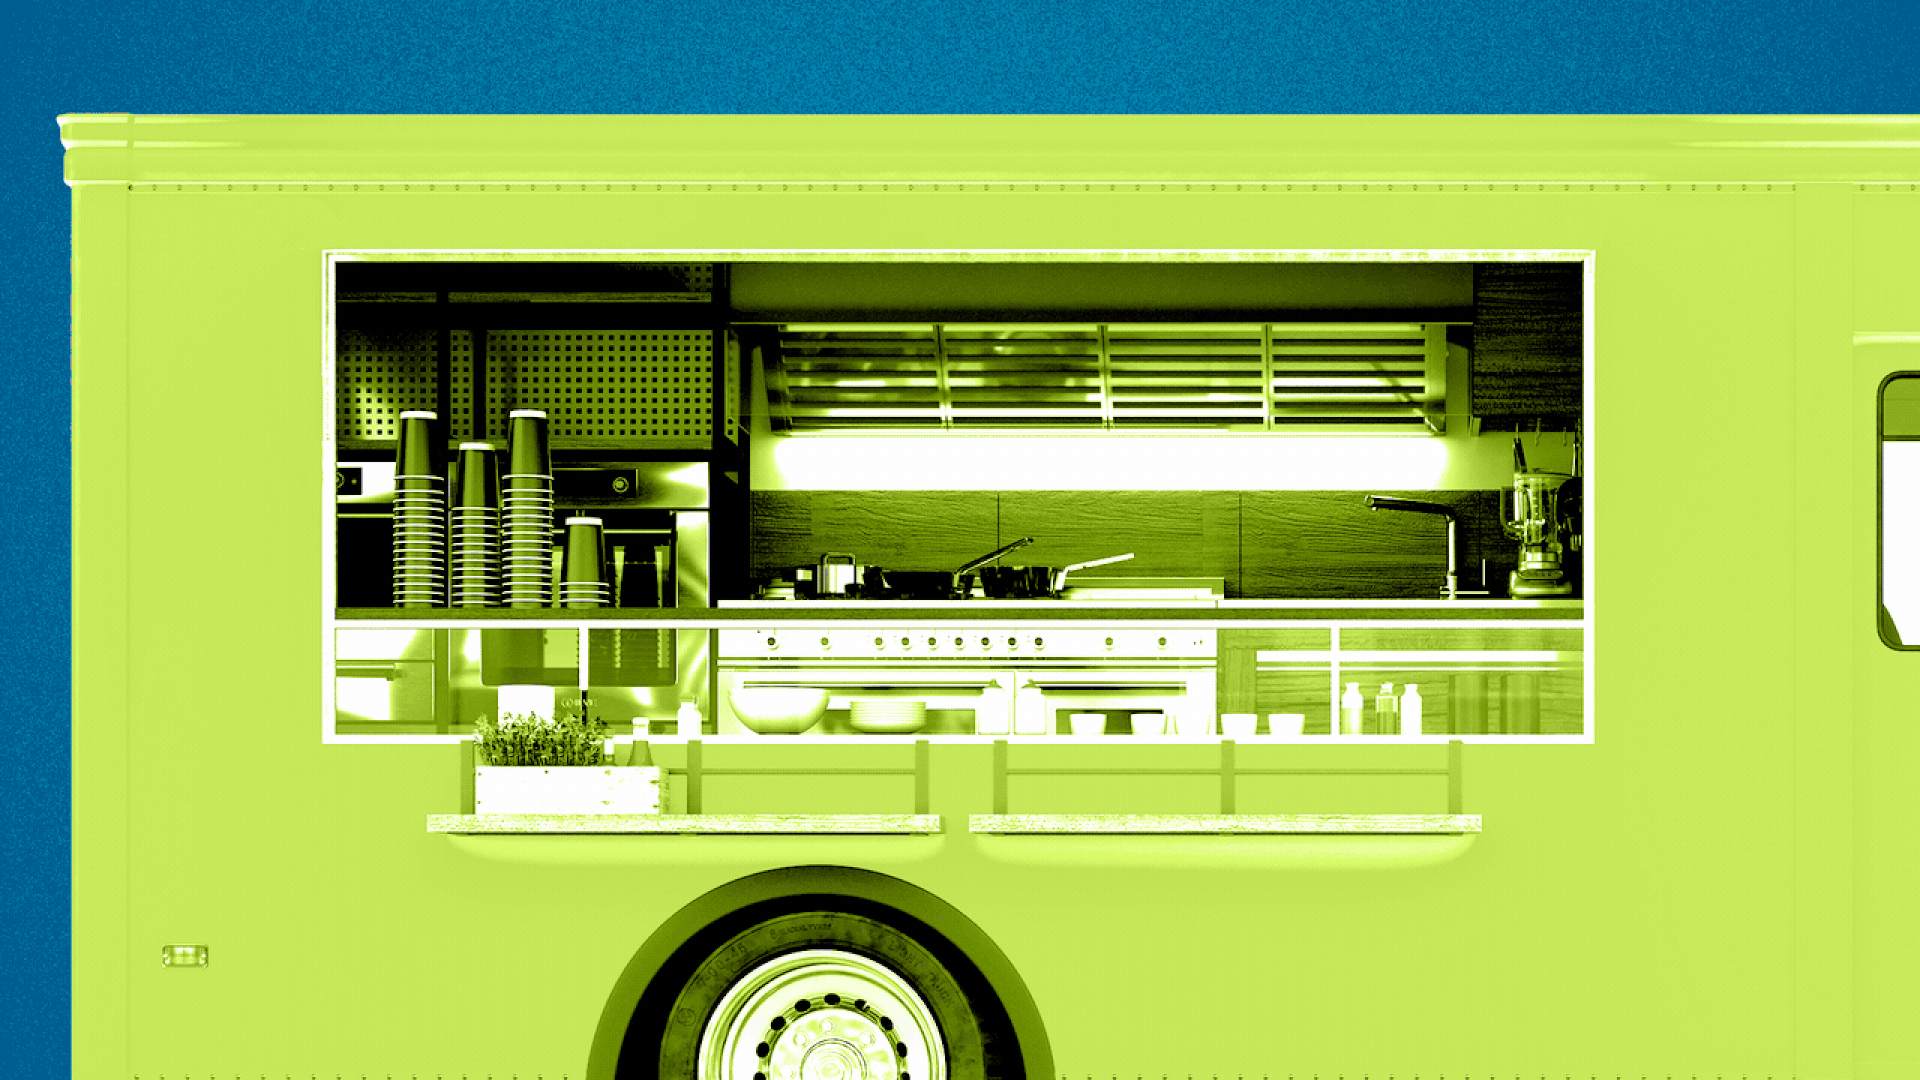 Illustration of a food truck with its grate closing, and a no-sign on the grate. 